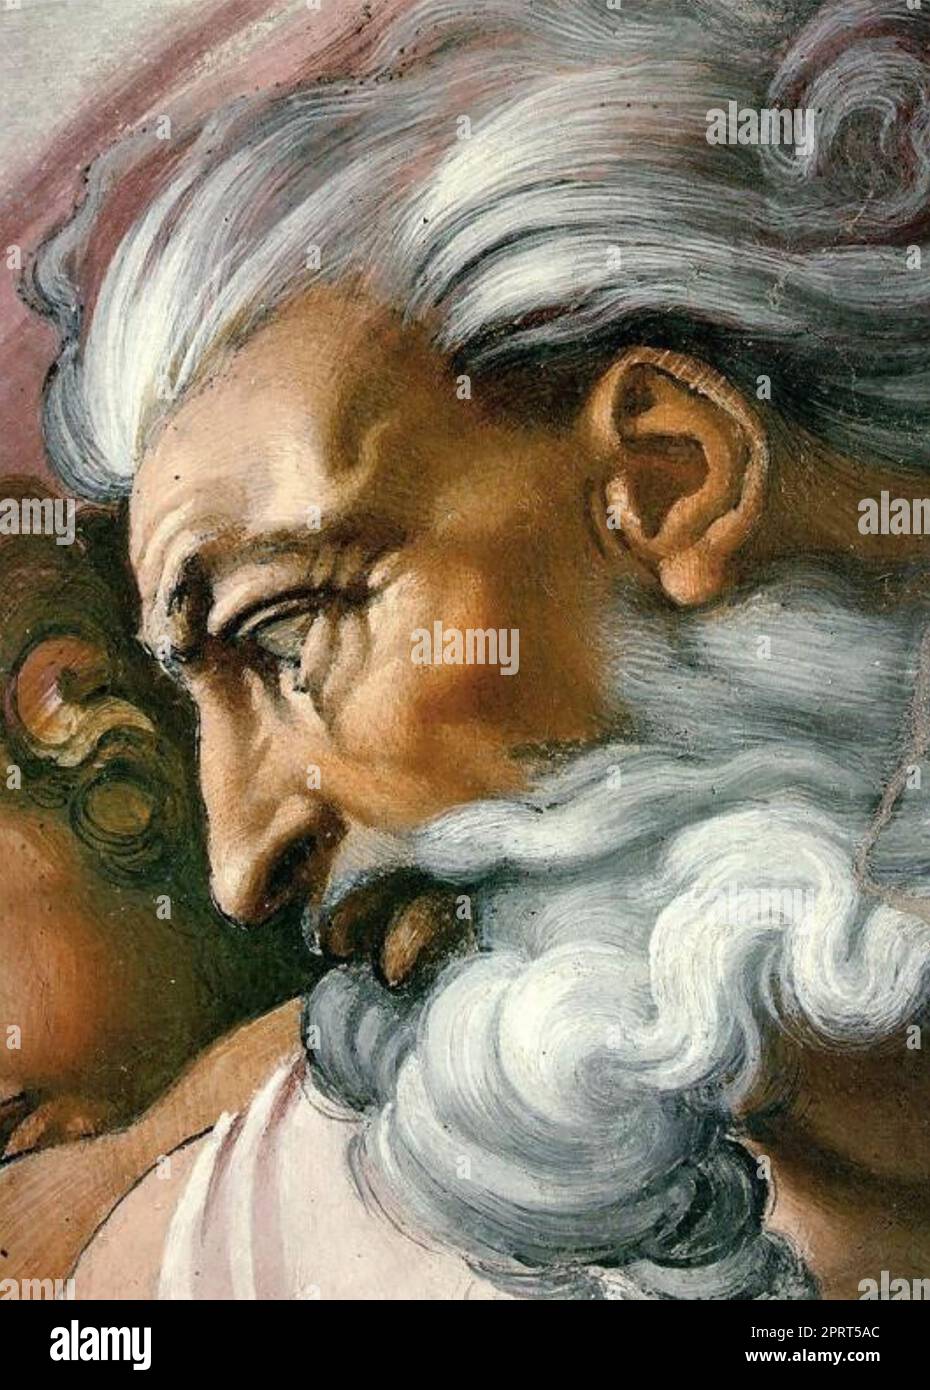 THE CREATION OF ADAM  Detail showing God  in the Sistine Chapel painting by Michelangelo Stock Photo